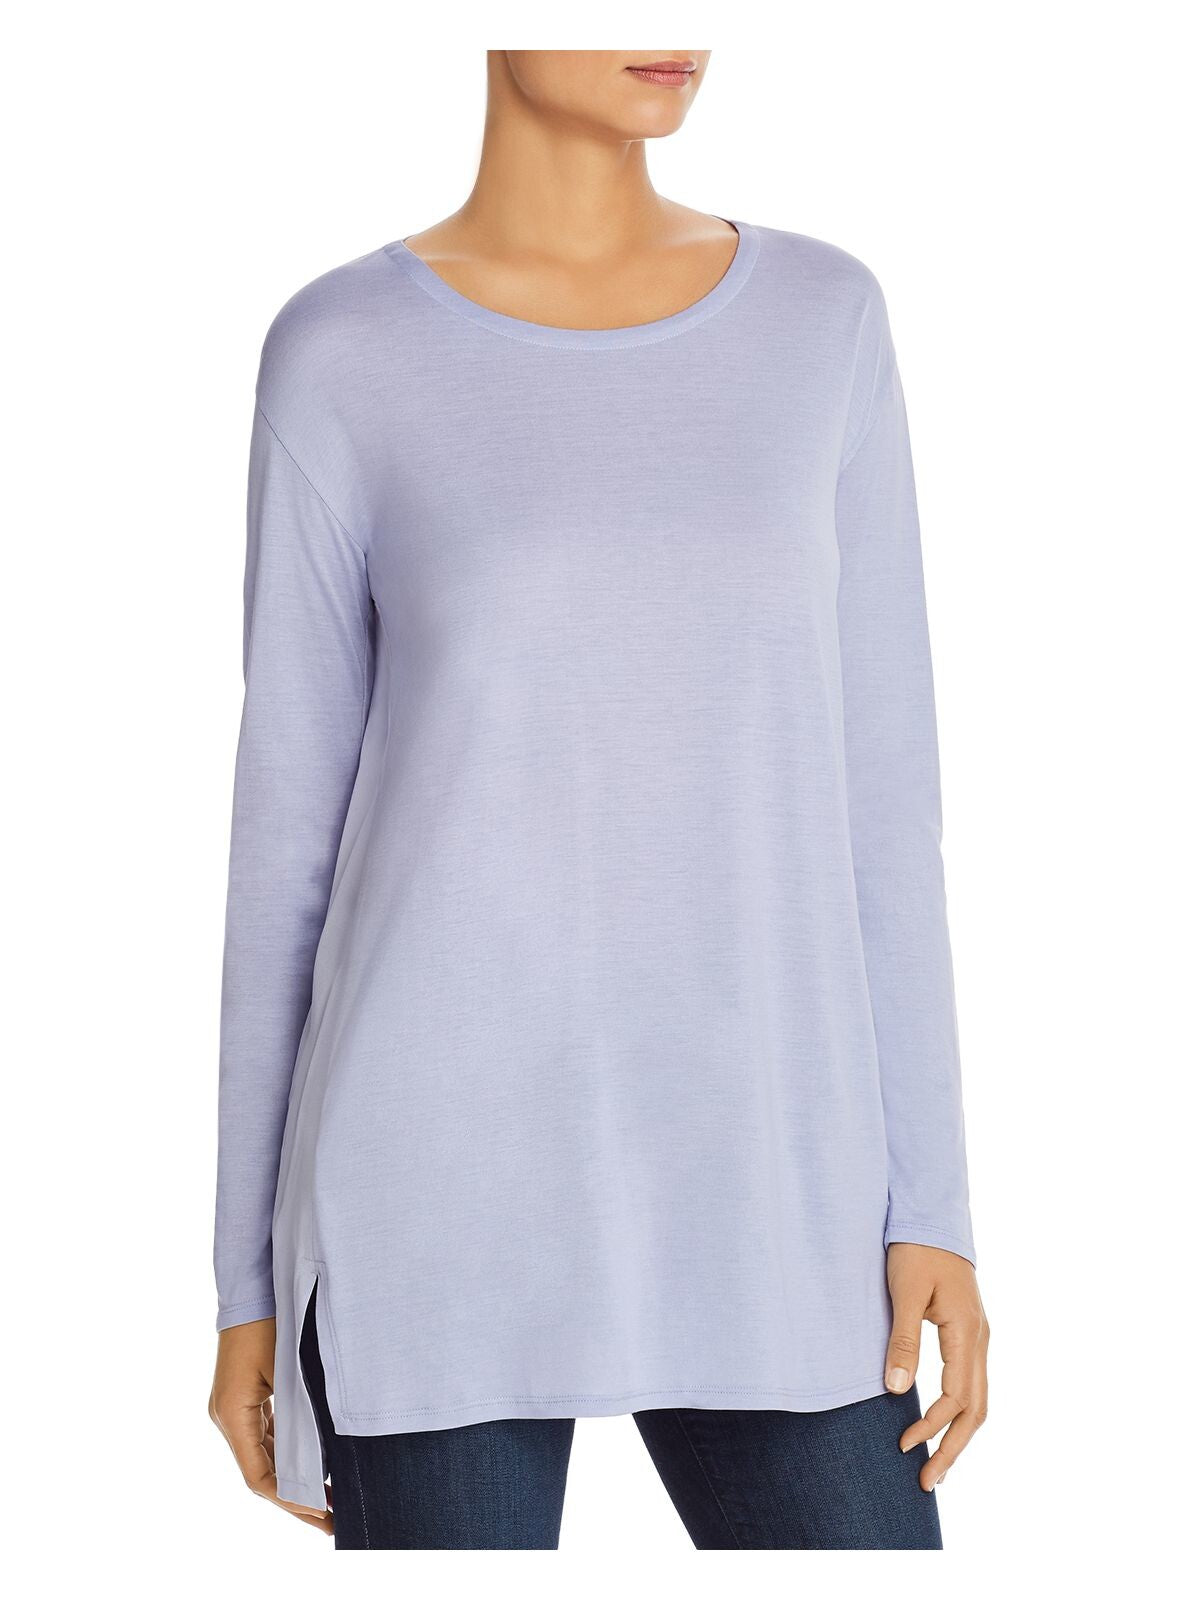 EILEEN FISHER Womens Purple Cotton Slitted Jersey Long Sleeve Jewel Neck Tunic Top S